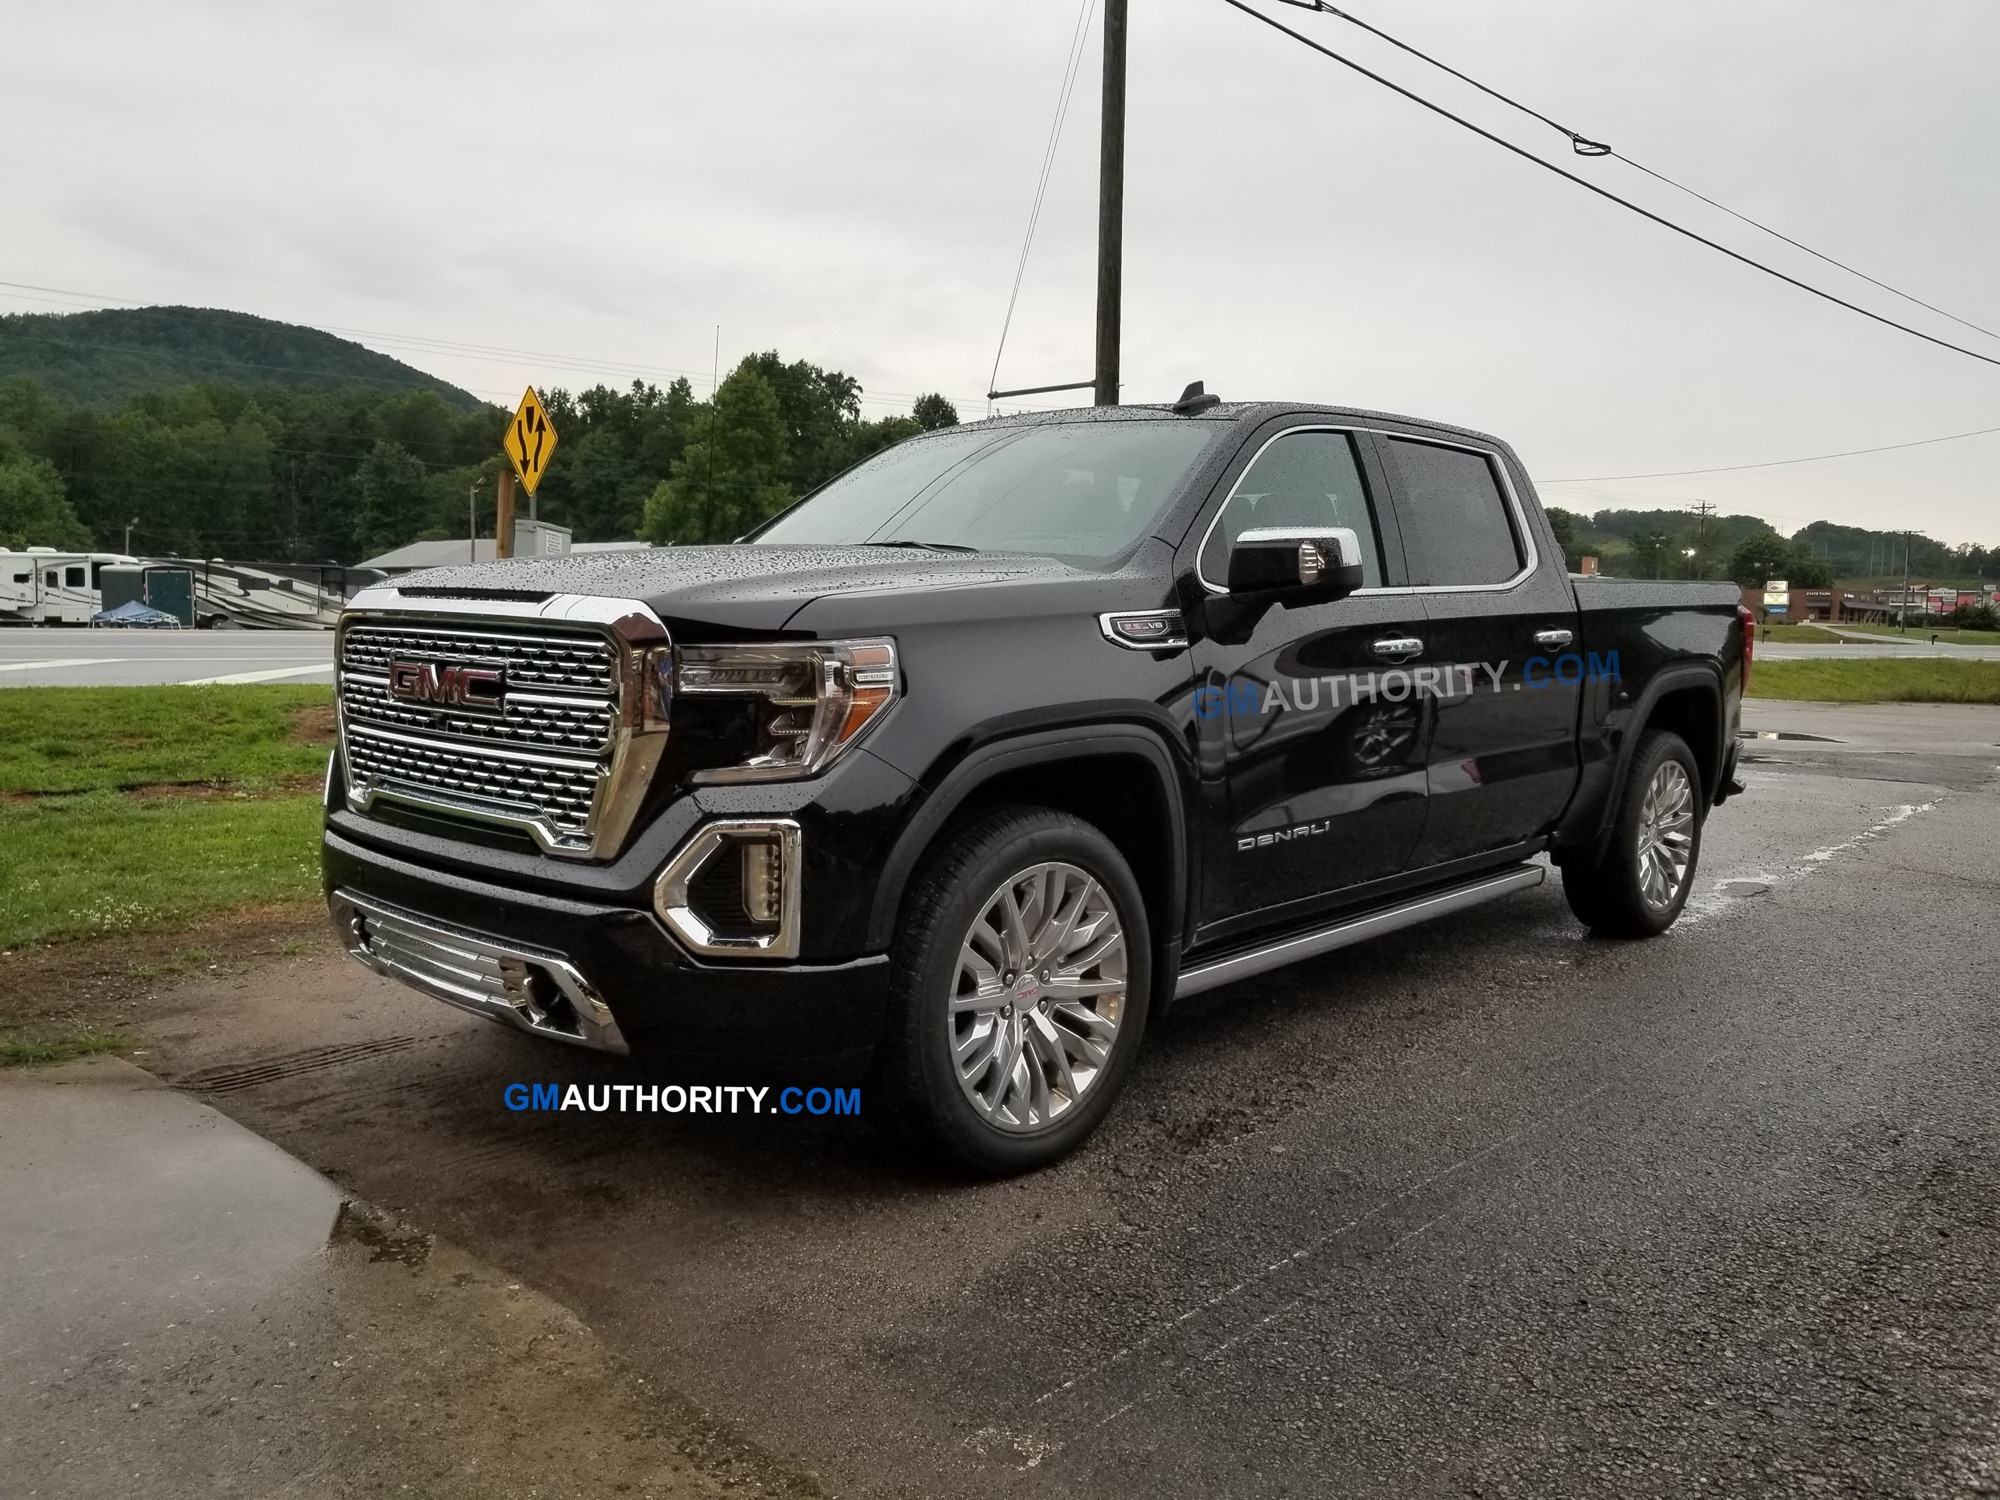 2019 Sierra Has This One Feature That 2019 Silverado Does Not | GM Authority 2019 Gmc Sierra Denali Magnetic Ride Control